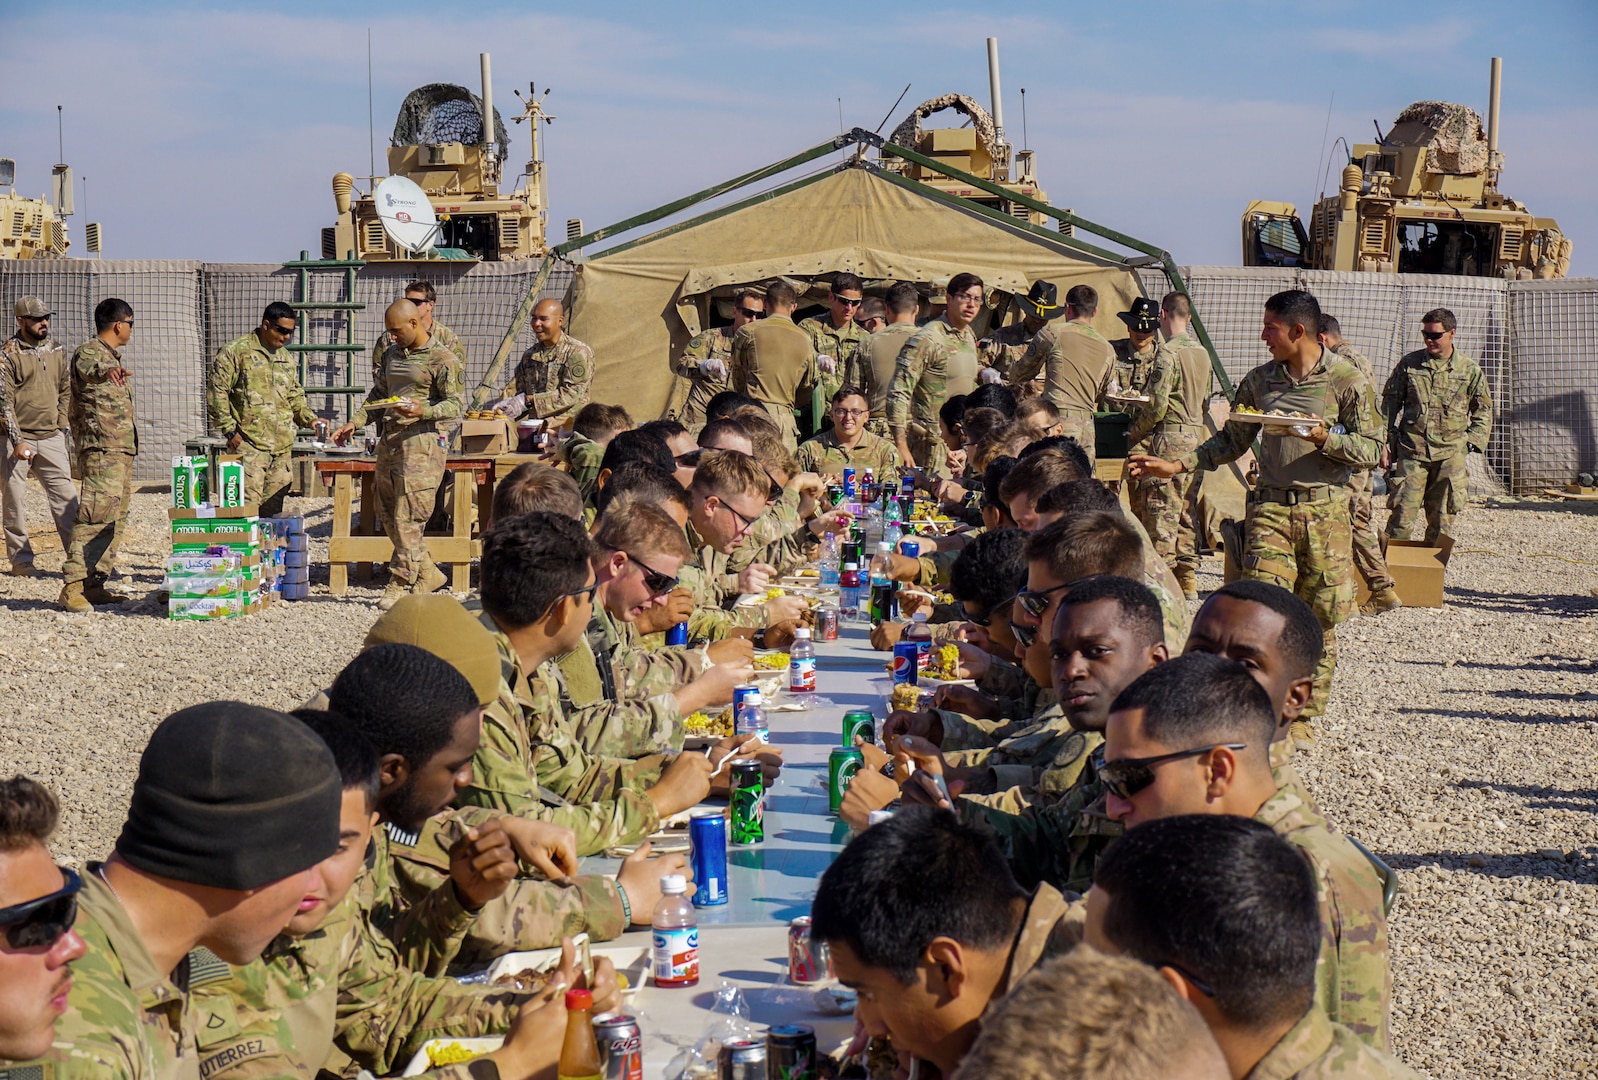 Soldiers assigned to 3rd Cavalry Regiment enjoy Thanksgiving dinner on Fire Base Saham, Iraq, Nov. 20, 2018. This year, Army Central Command plans to feed about 50,000 troops, government civilians, contractors and coalition partners across its area of operations. (Photo Credit: Capt. Jason Welch)